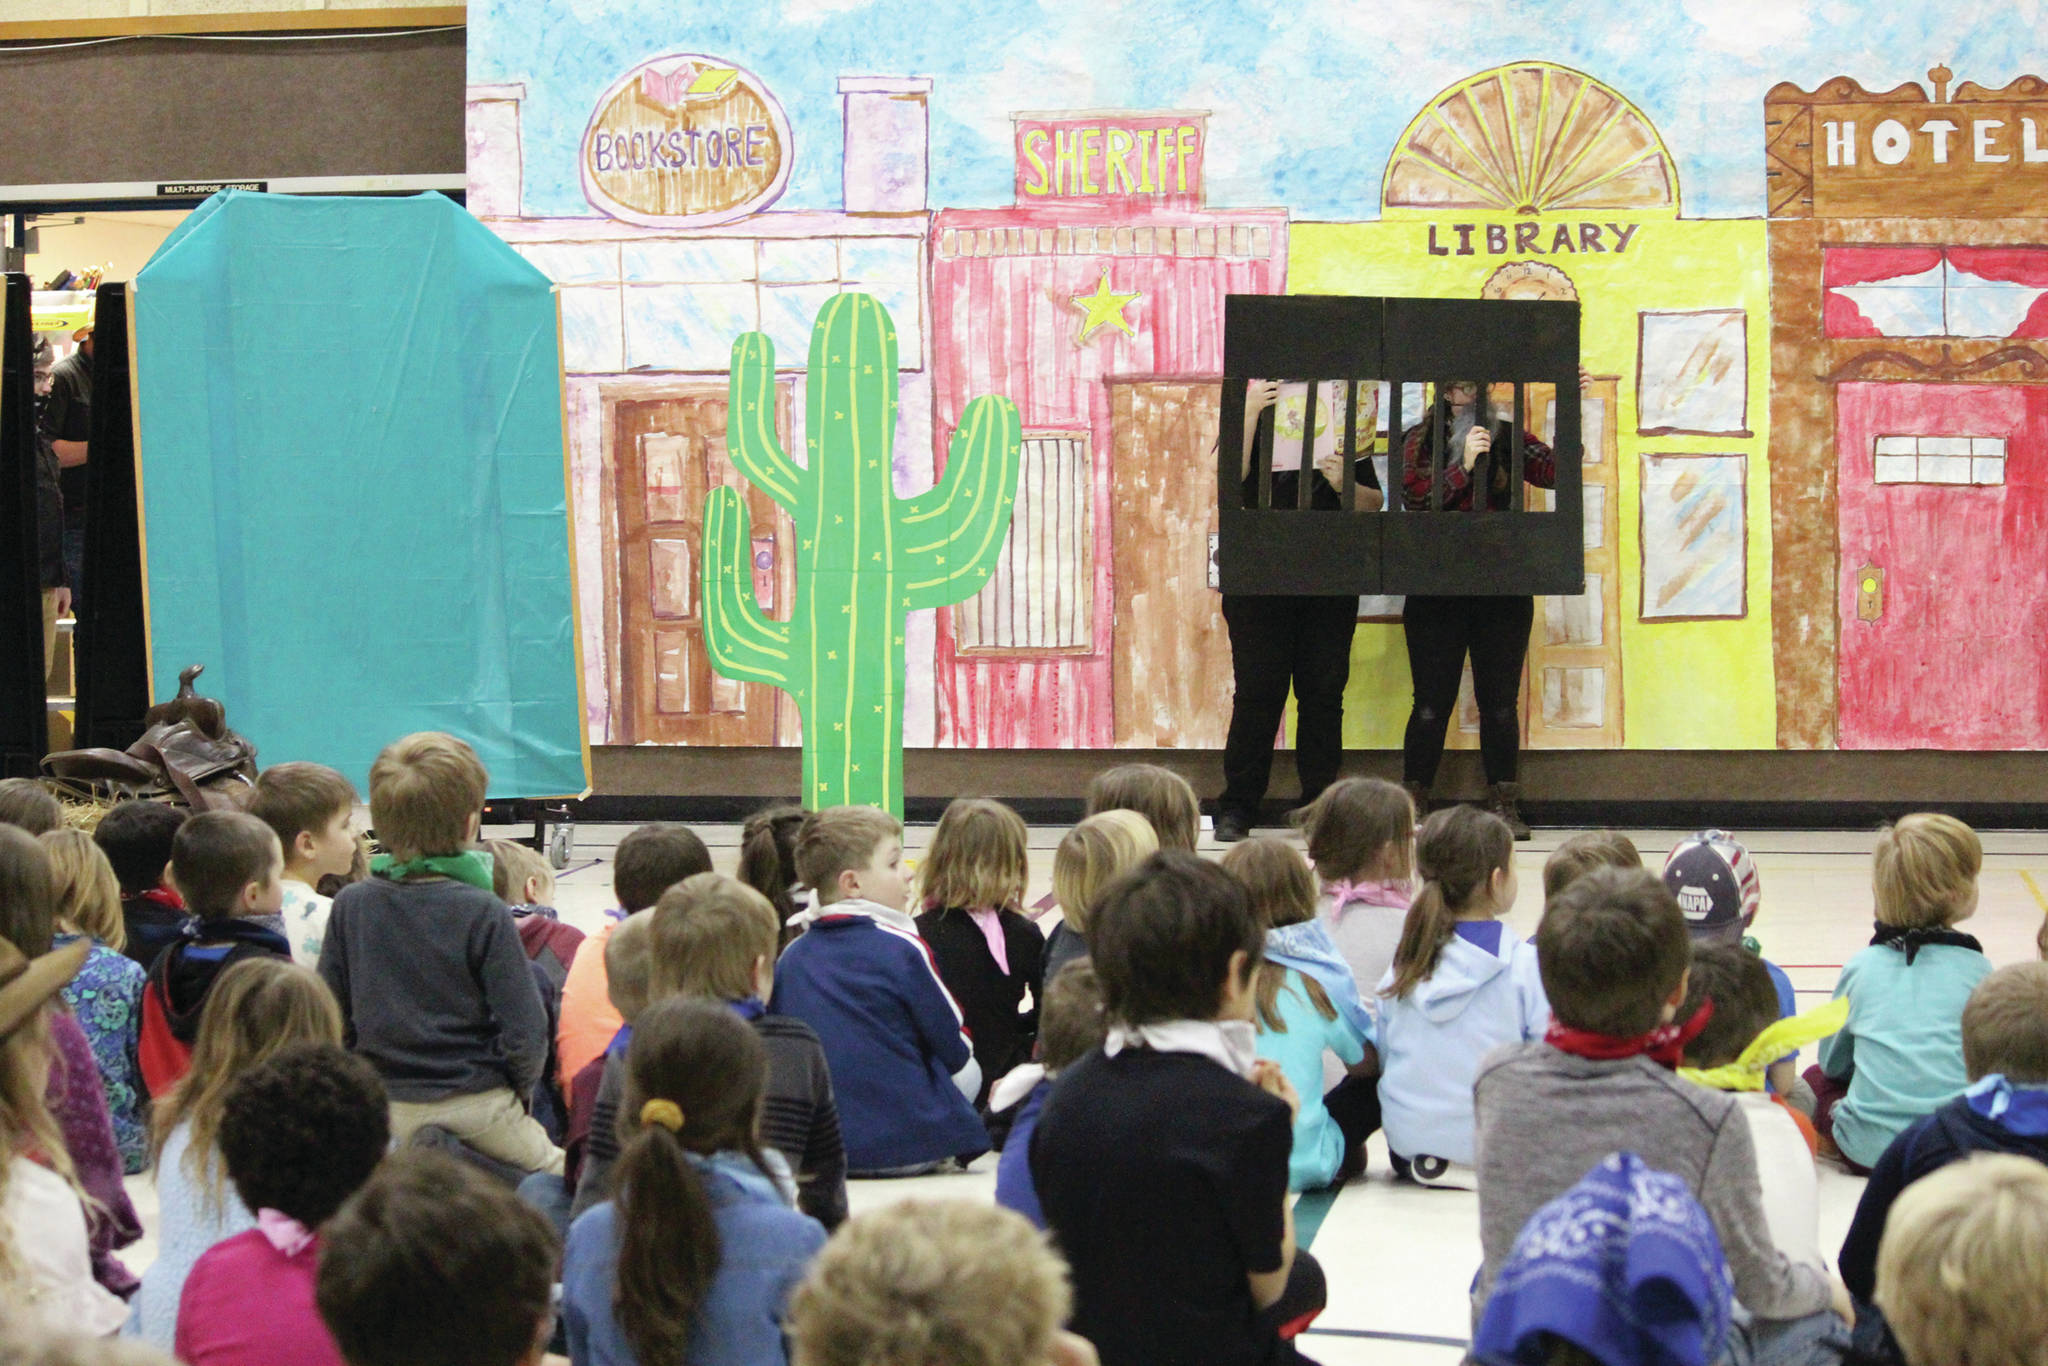 Students at Paul Banks Elementary School listen to an assembly celebrating the kickoff of the school’s annual Read-A-Thon on Feb. 3, 2020 at the school in Homer, Alaska. Each year’s celebration has a different theme, and this year the teachers and staff put on a wild west-themed skit. (Photo by Megan Pacer/Homer News)